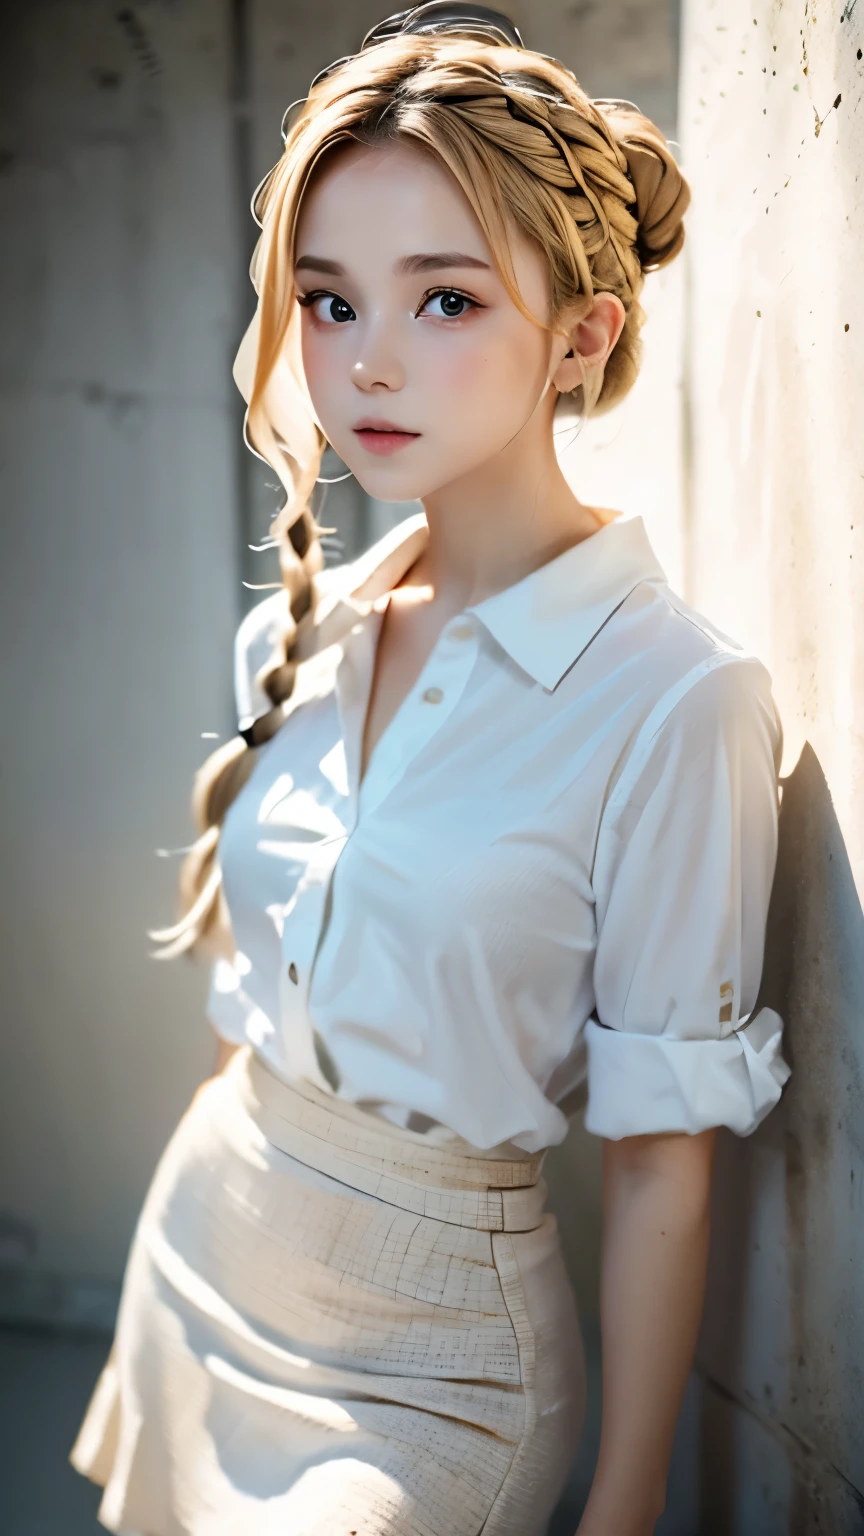 one woman、cute face、Rin々new expression、Japanese、Japanese、、gray eyes、beige hair、french braid、１６talent、white shirt、デニムのlong skirt、long skirt、random pose、(((photography studio、concrete background、perfect lighting、professional photographer、50ｍｍlens)))、highest quality、ultra high resolution、master piece:1.3，８ｋ、Precise finish、unreasonable